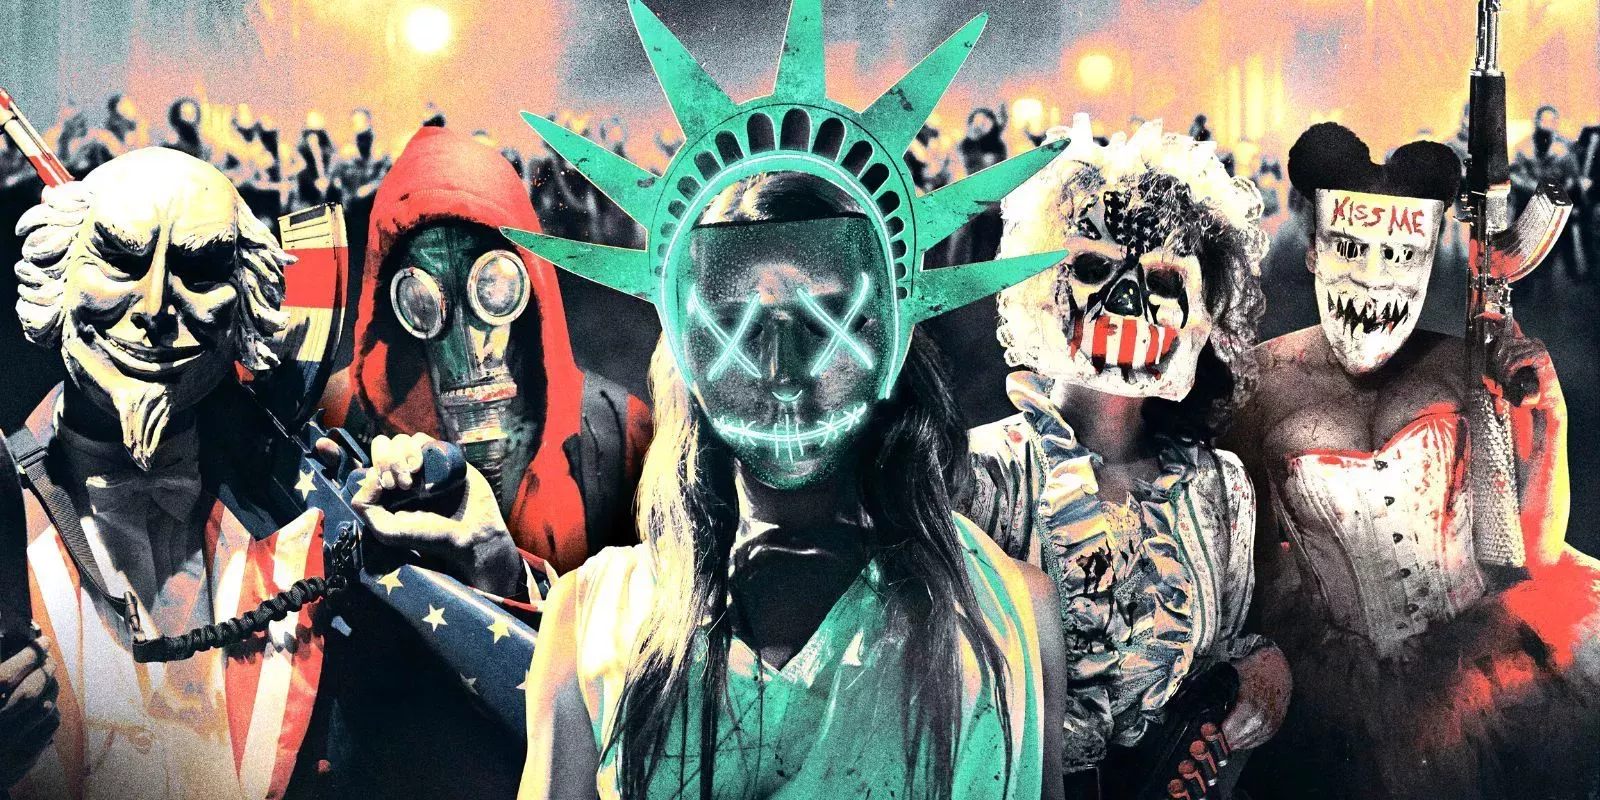 A cast of colorful masks from The Purge series